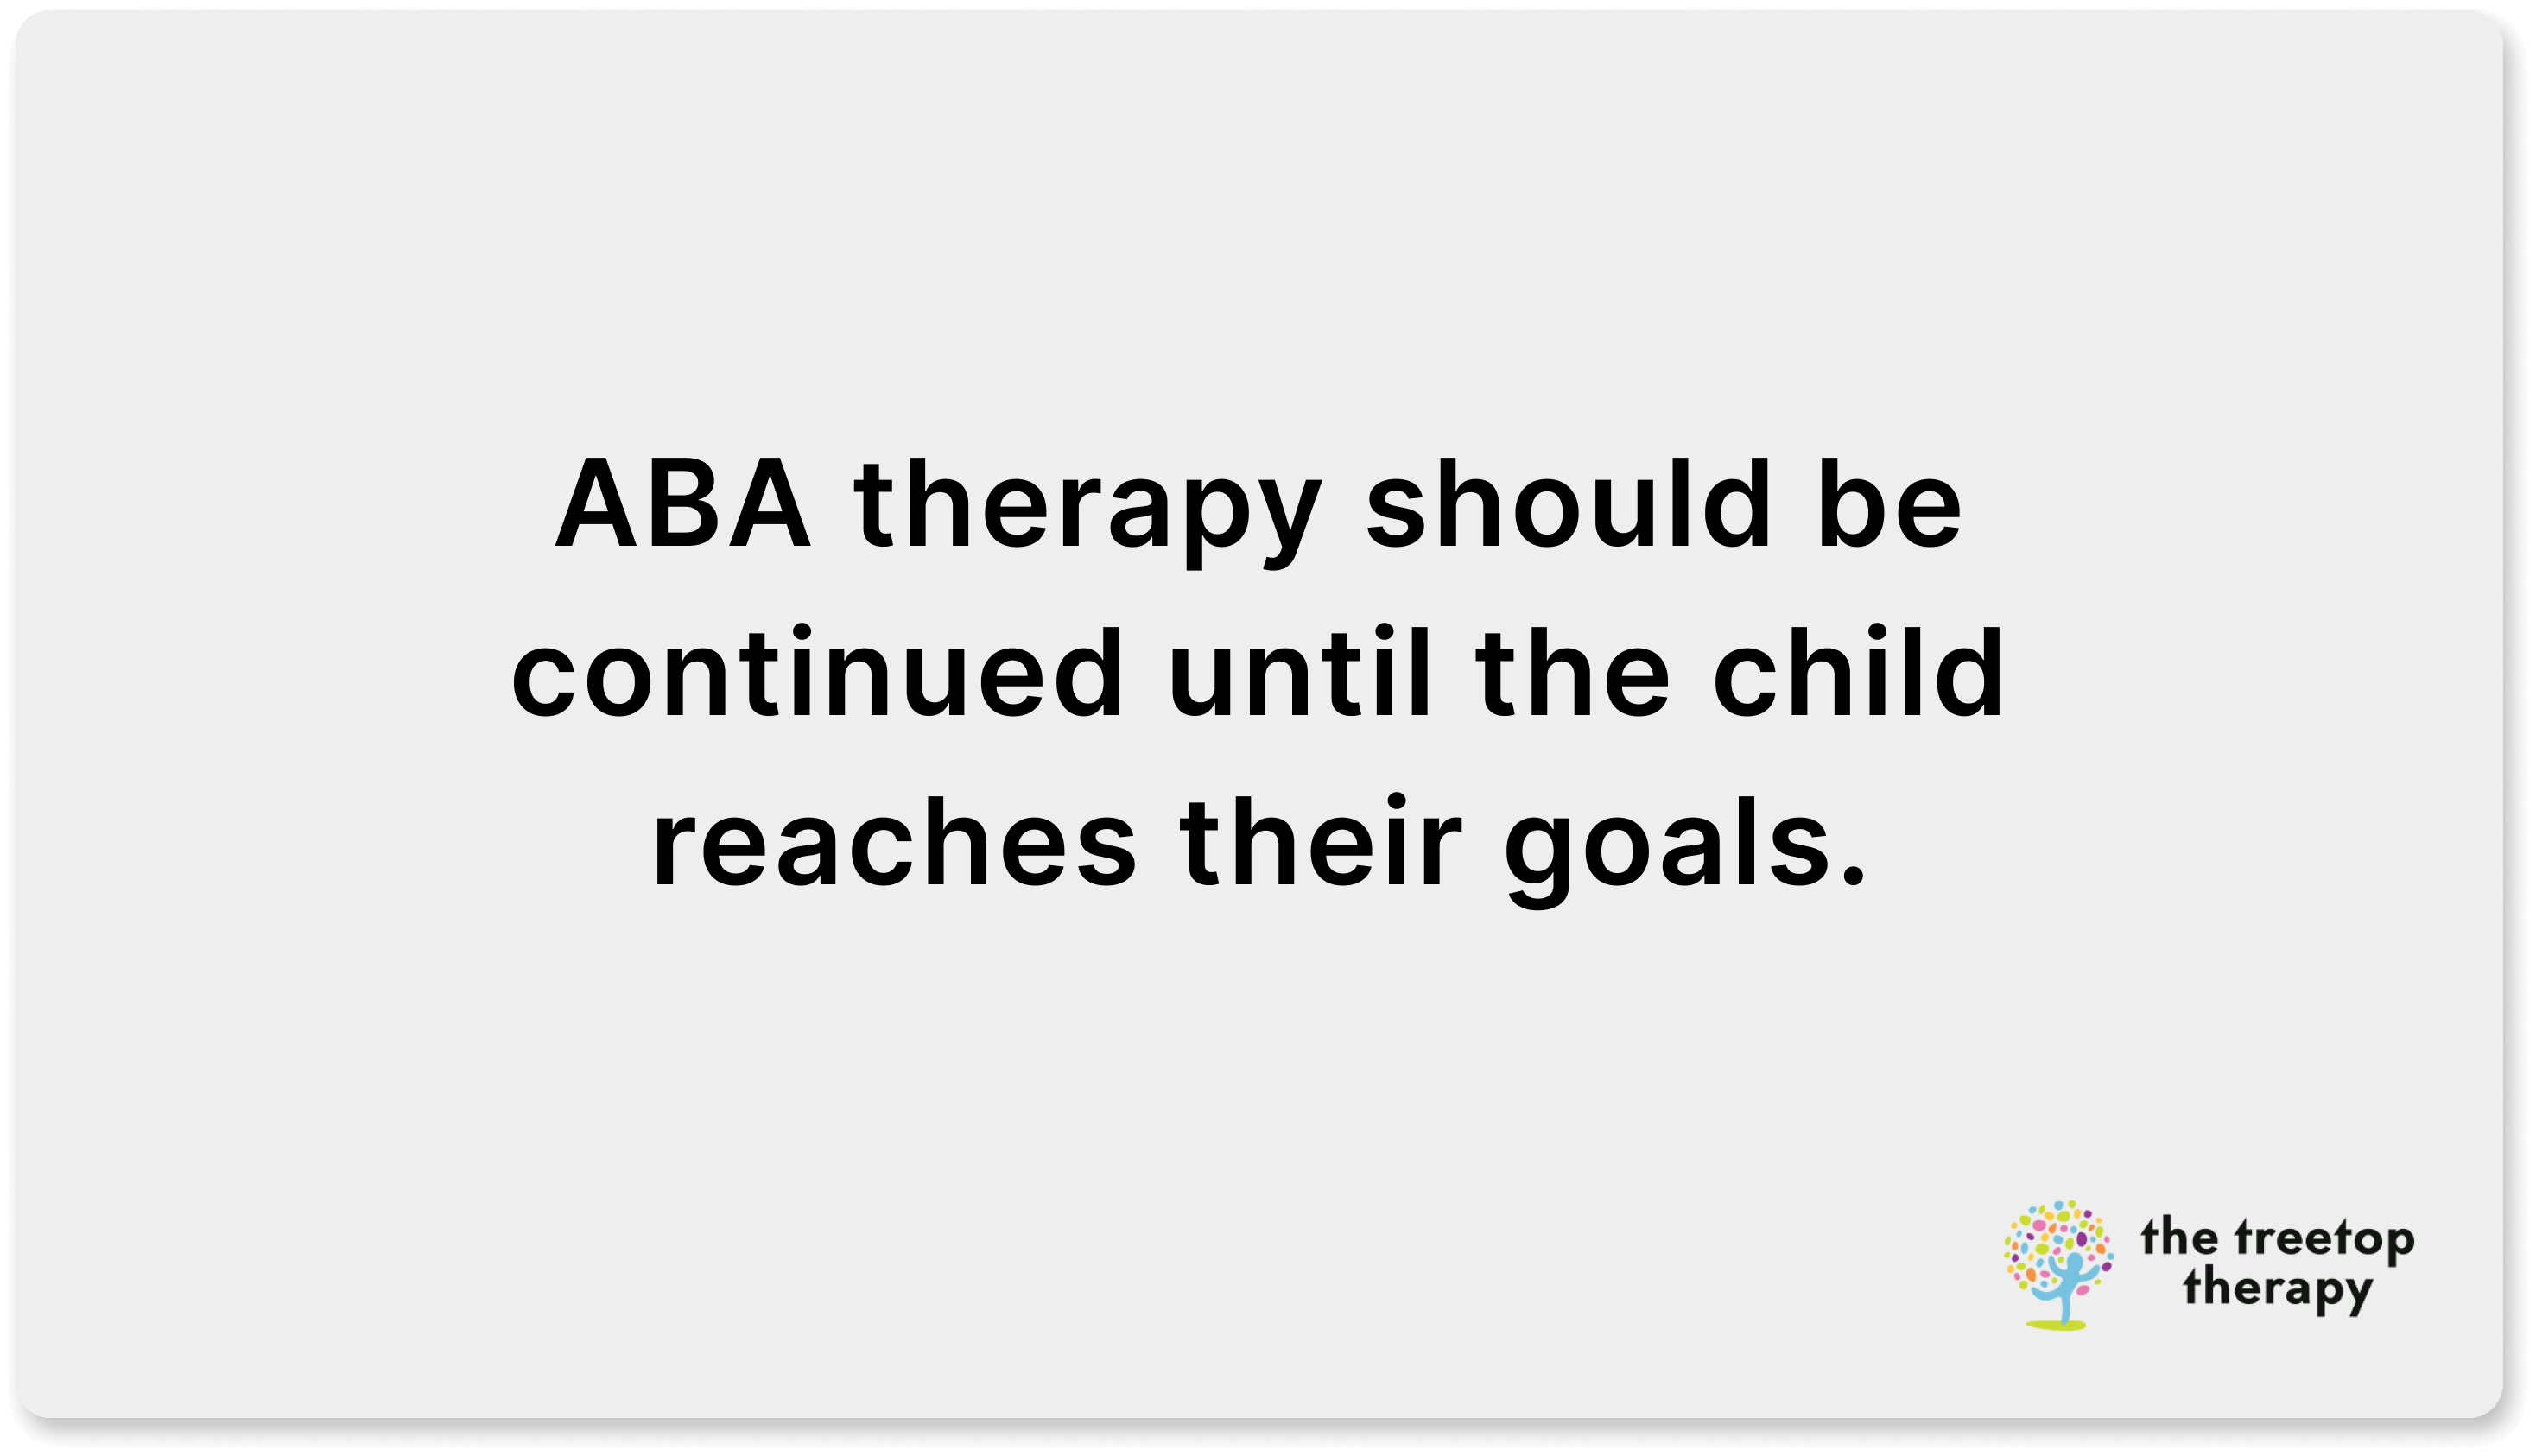 when aba therapy should continue